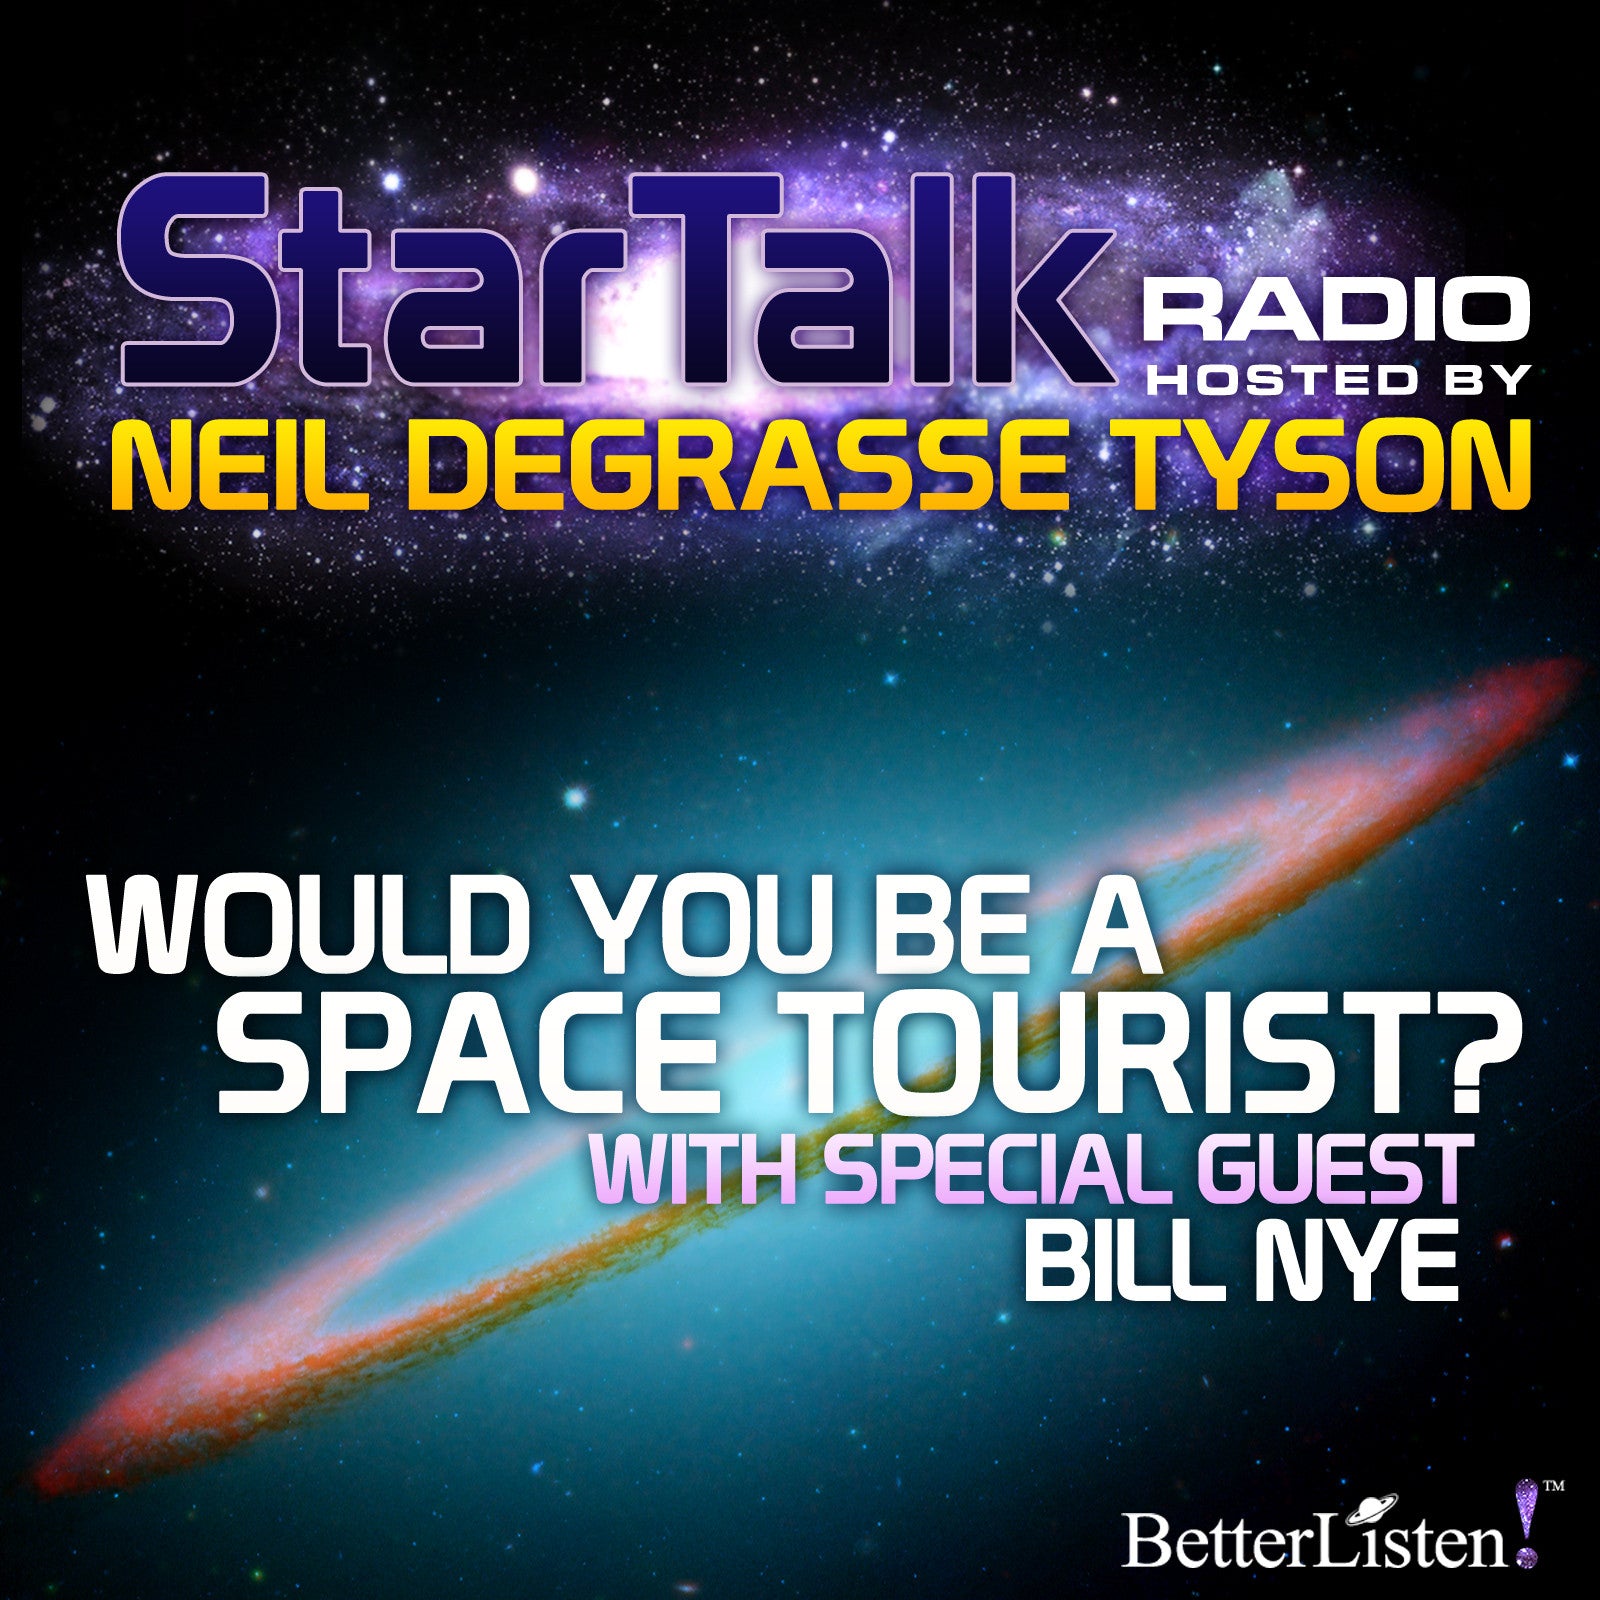 Would You be a Space Tourist? With Special Guest Bill Nye Audio Program StarTalk - BetterListen!